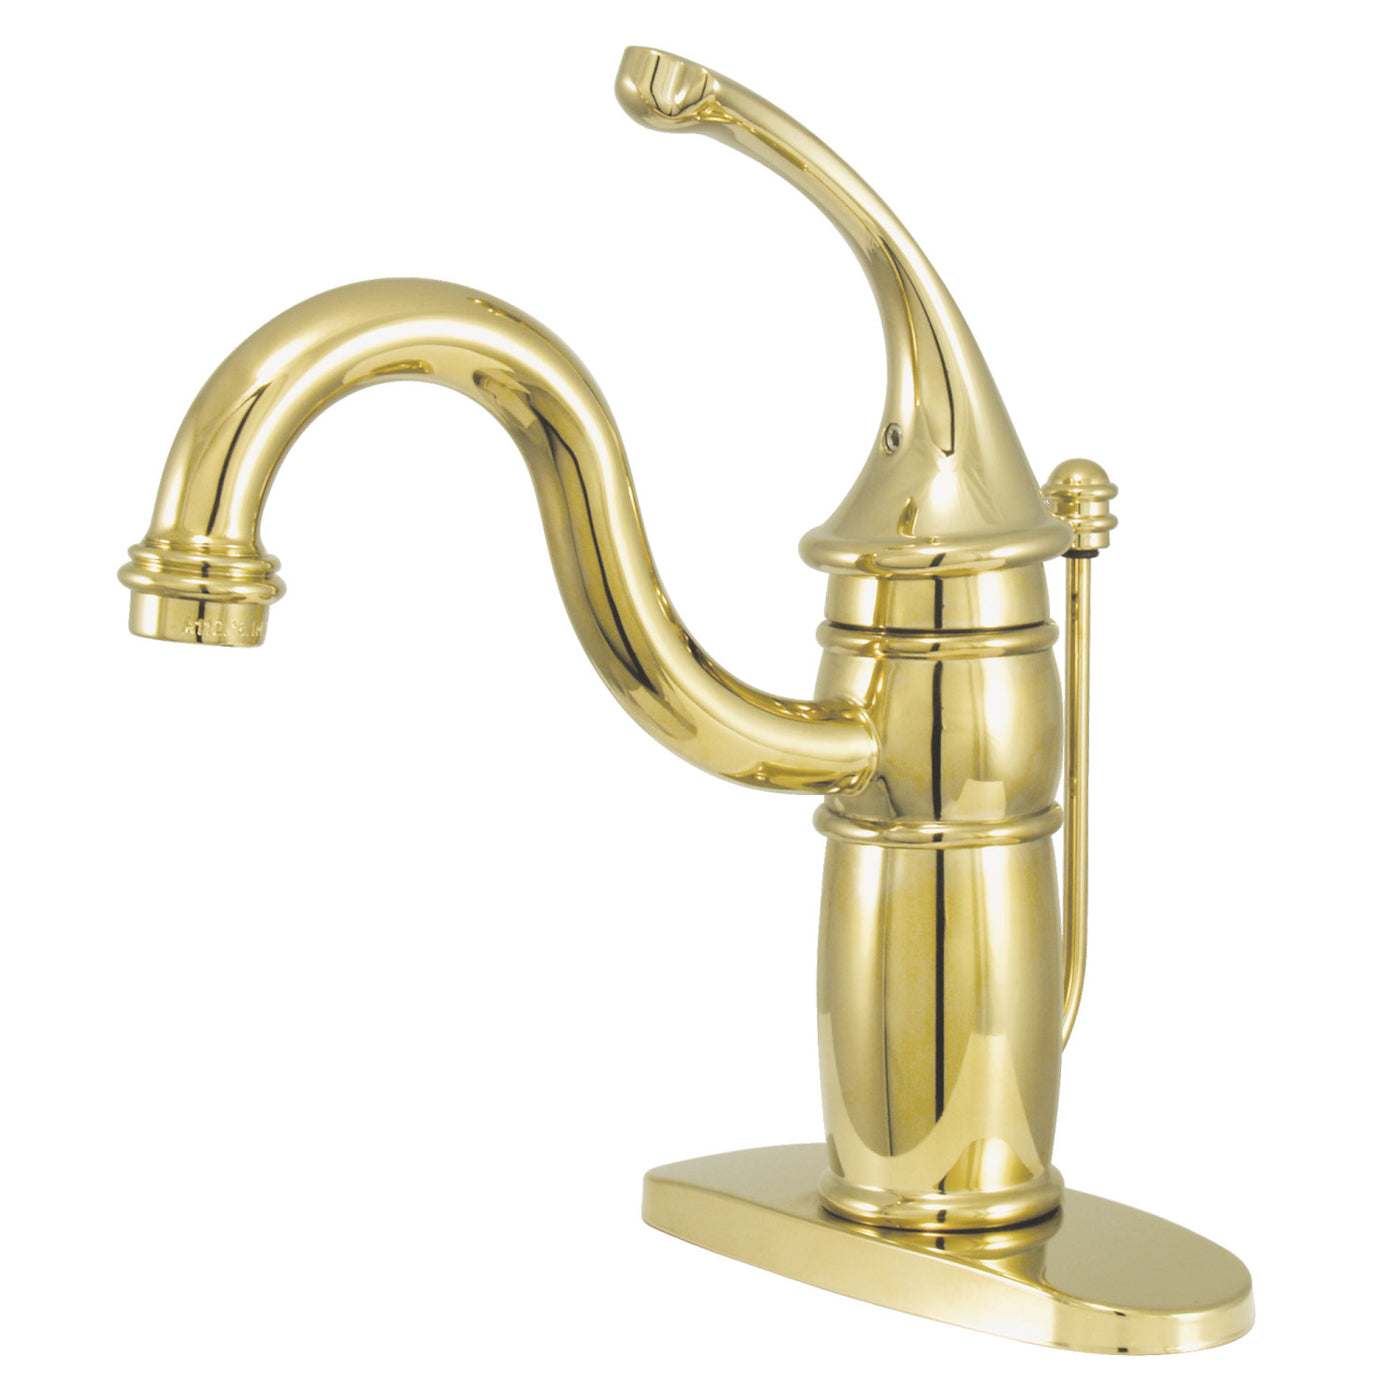 Elements of Design EB1402GL Single-Handle Bathroom Faucet with Pop-Up Drain, Polished Brass